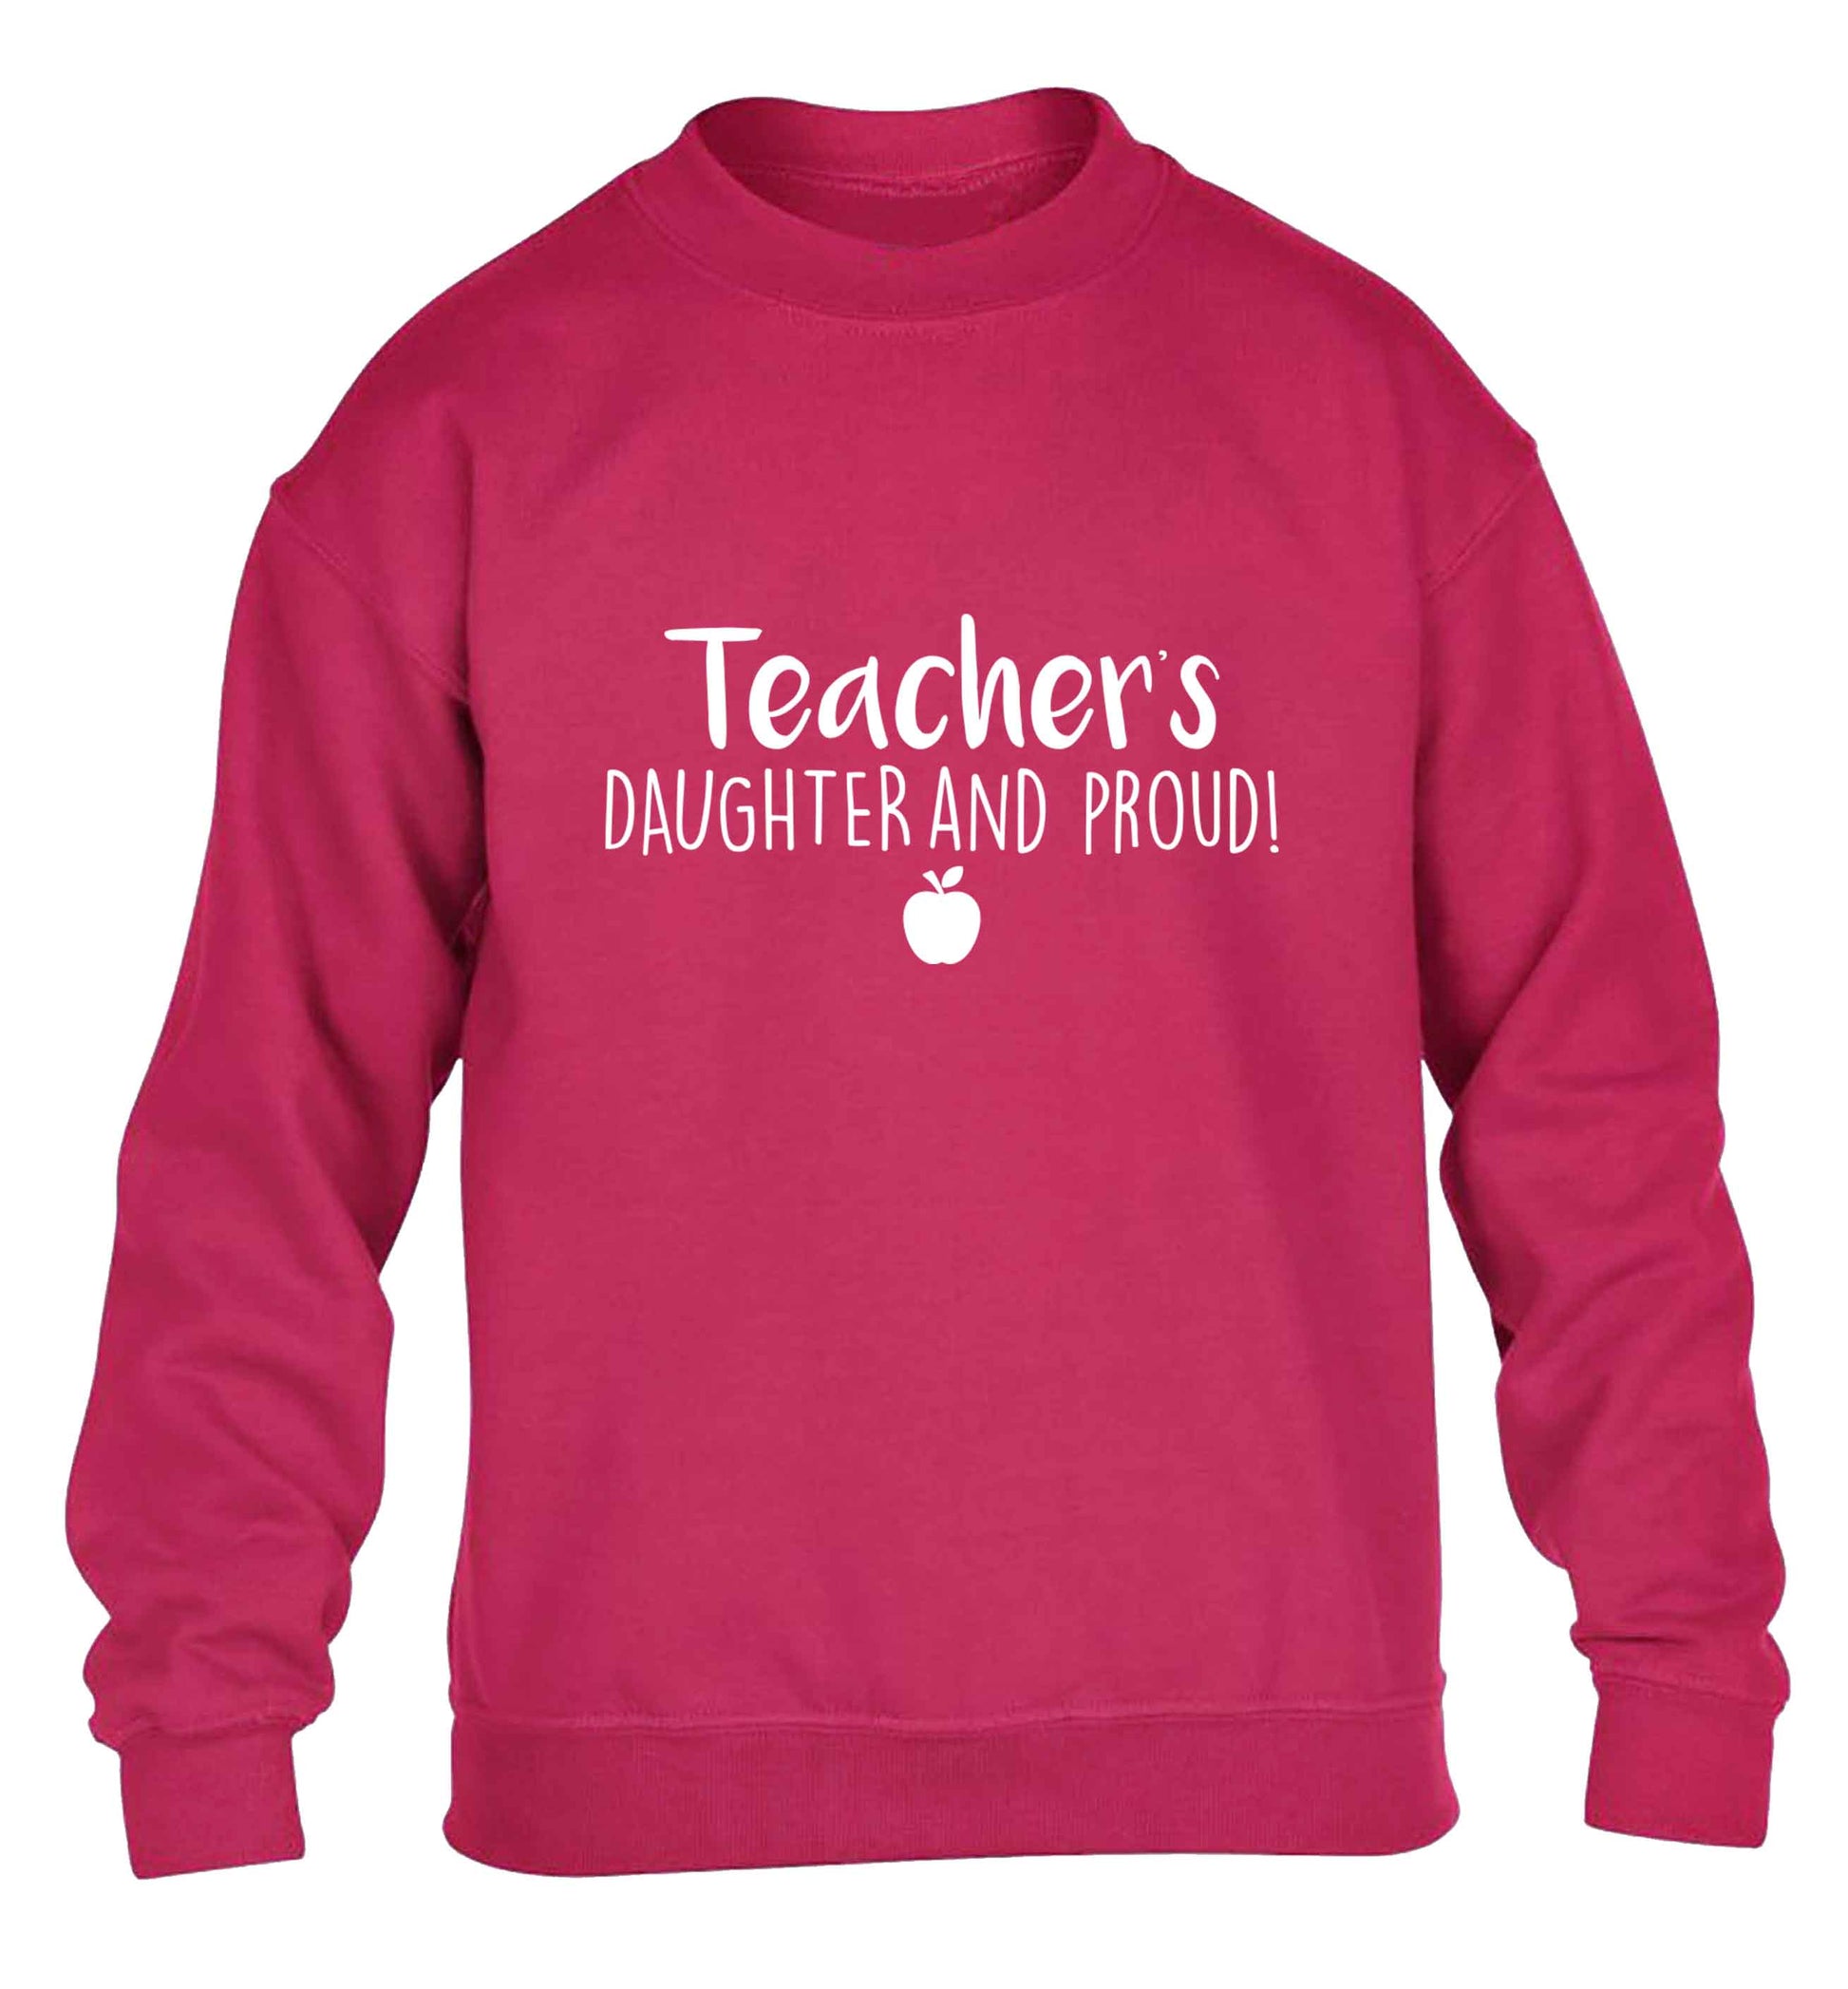 Teachers daughter and proud children's pink sweater 12-13 Years